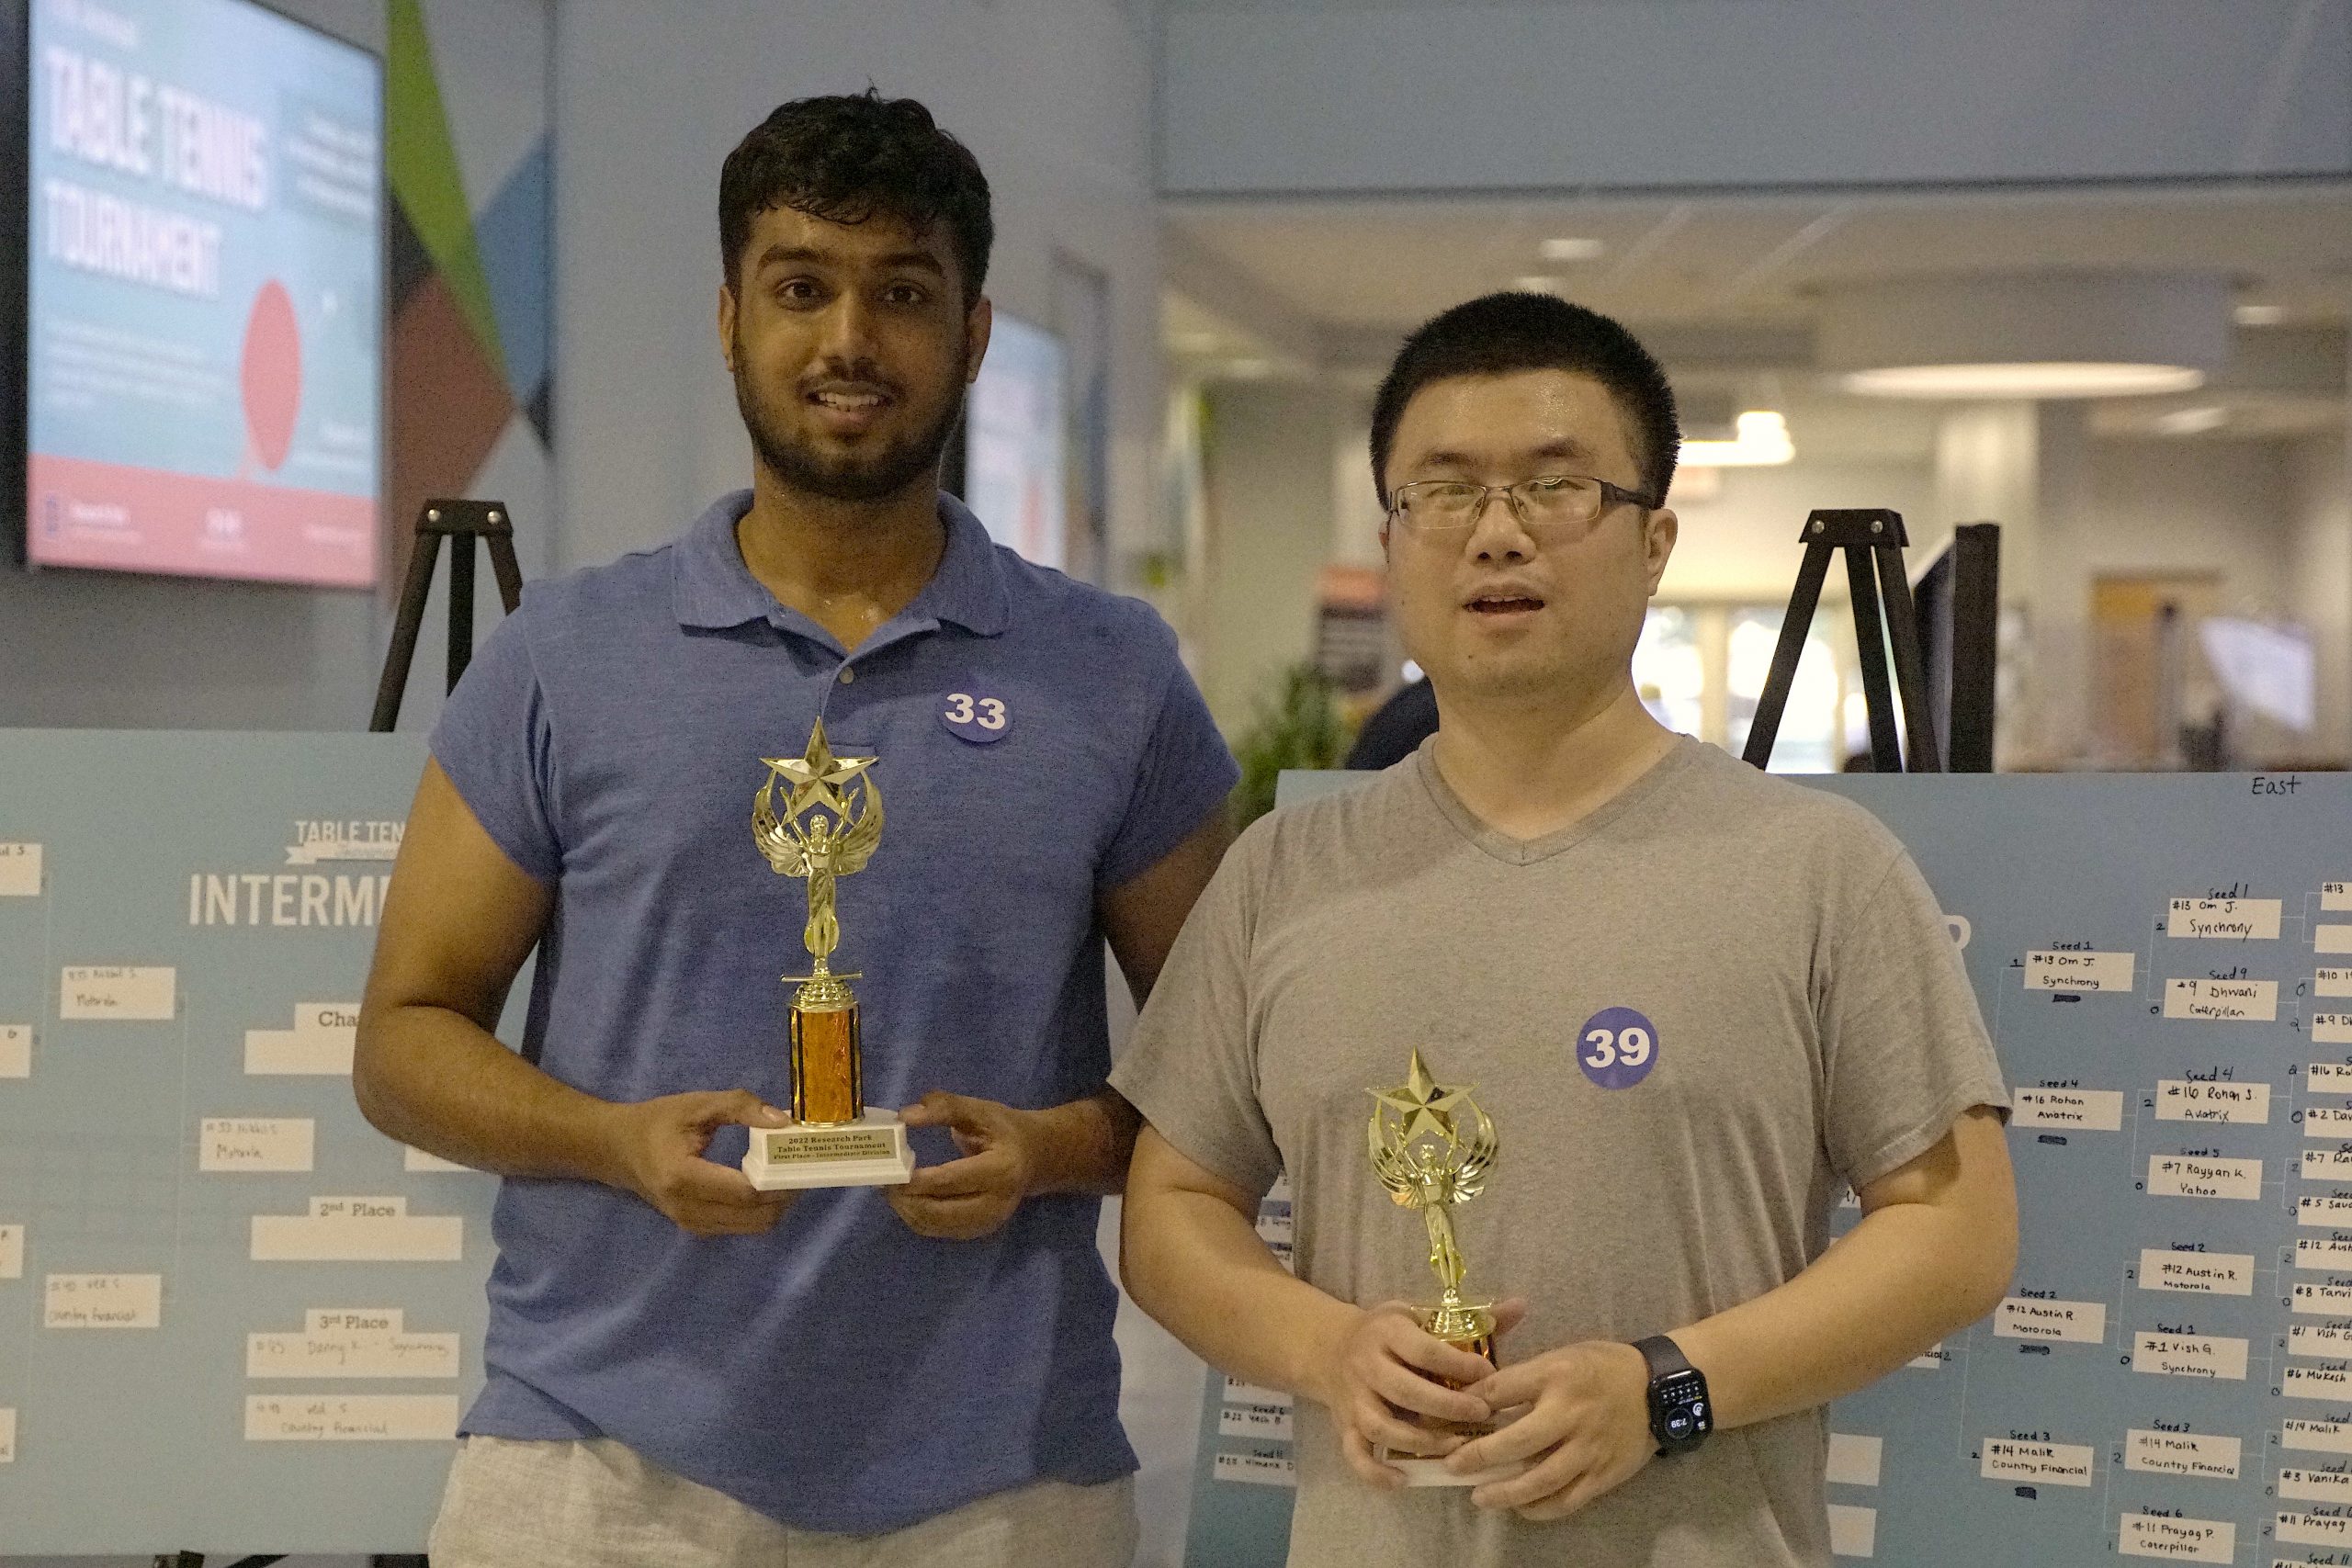 Research Park Table Tennis Tournament June 2022: 1st (left) and 2nd (right) place winners of the intermediate bracket.